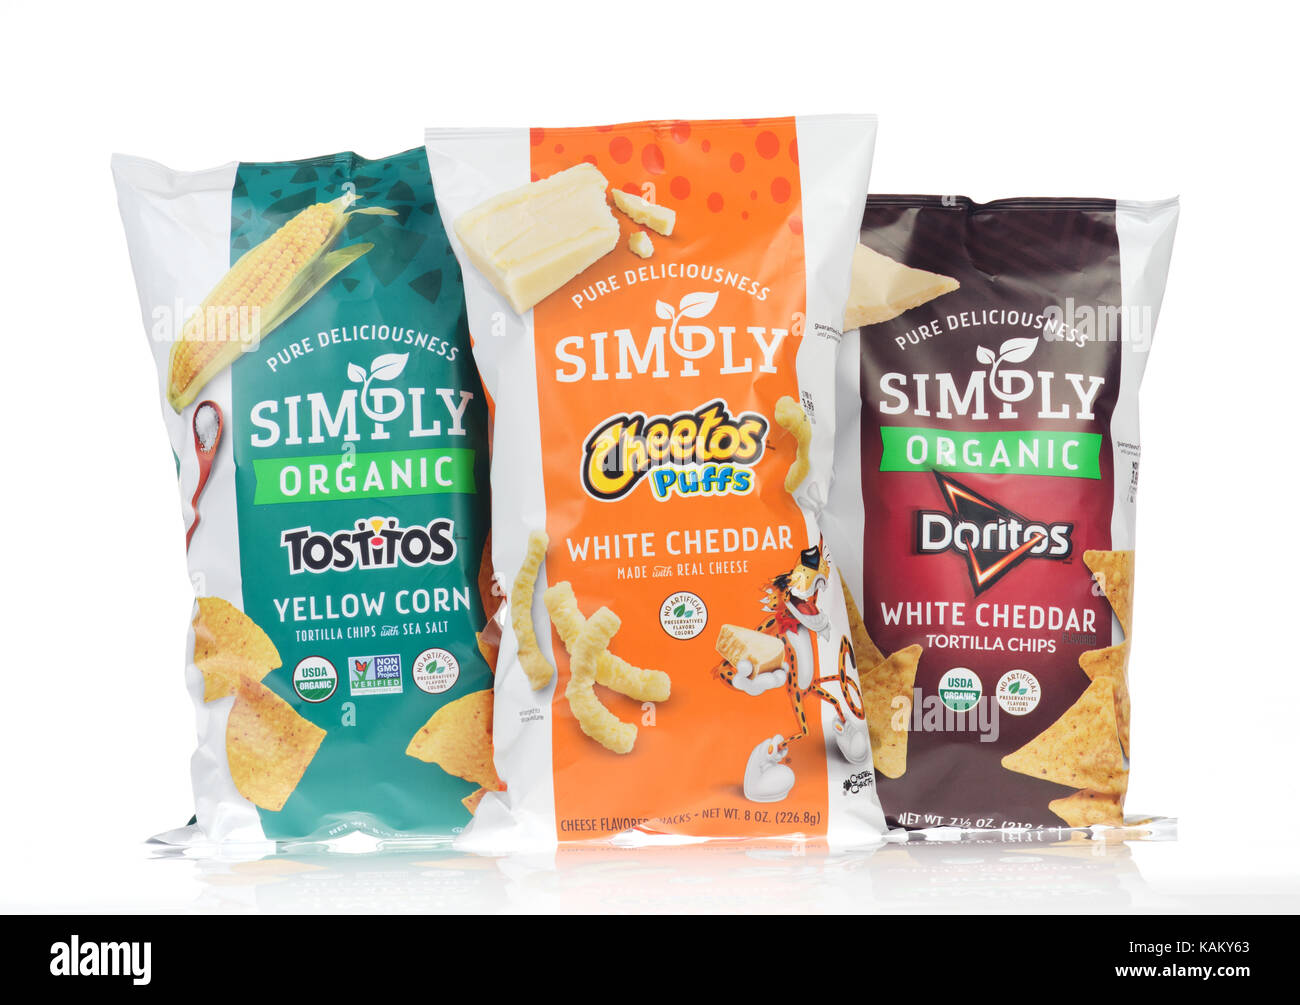 Bags of Simply Organic Tostitos, Simply Cheetos and Simply Organic Doritos by Frito-Lay on white background, cut out USA Stock Photo